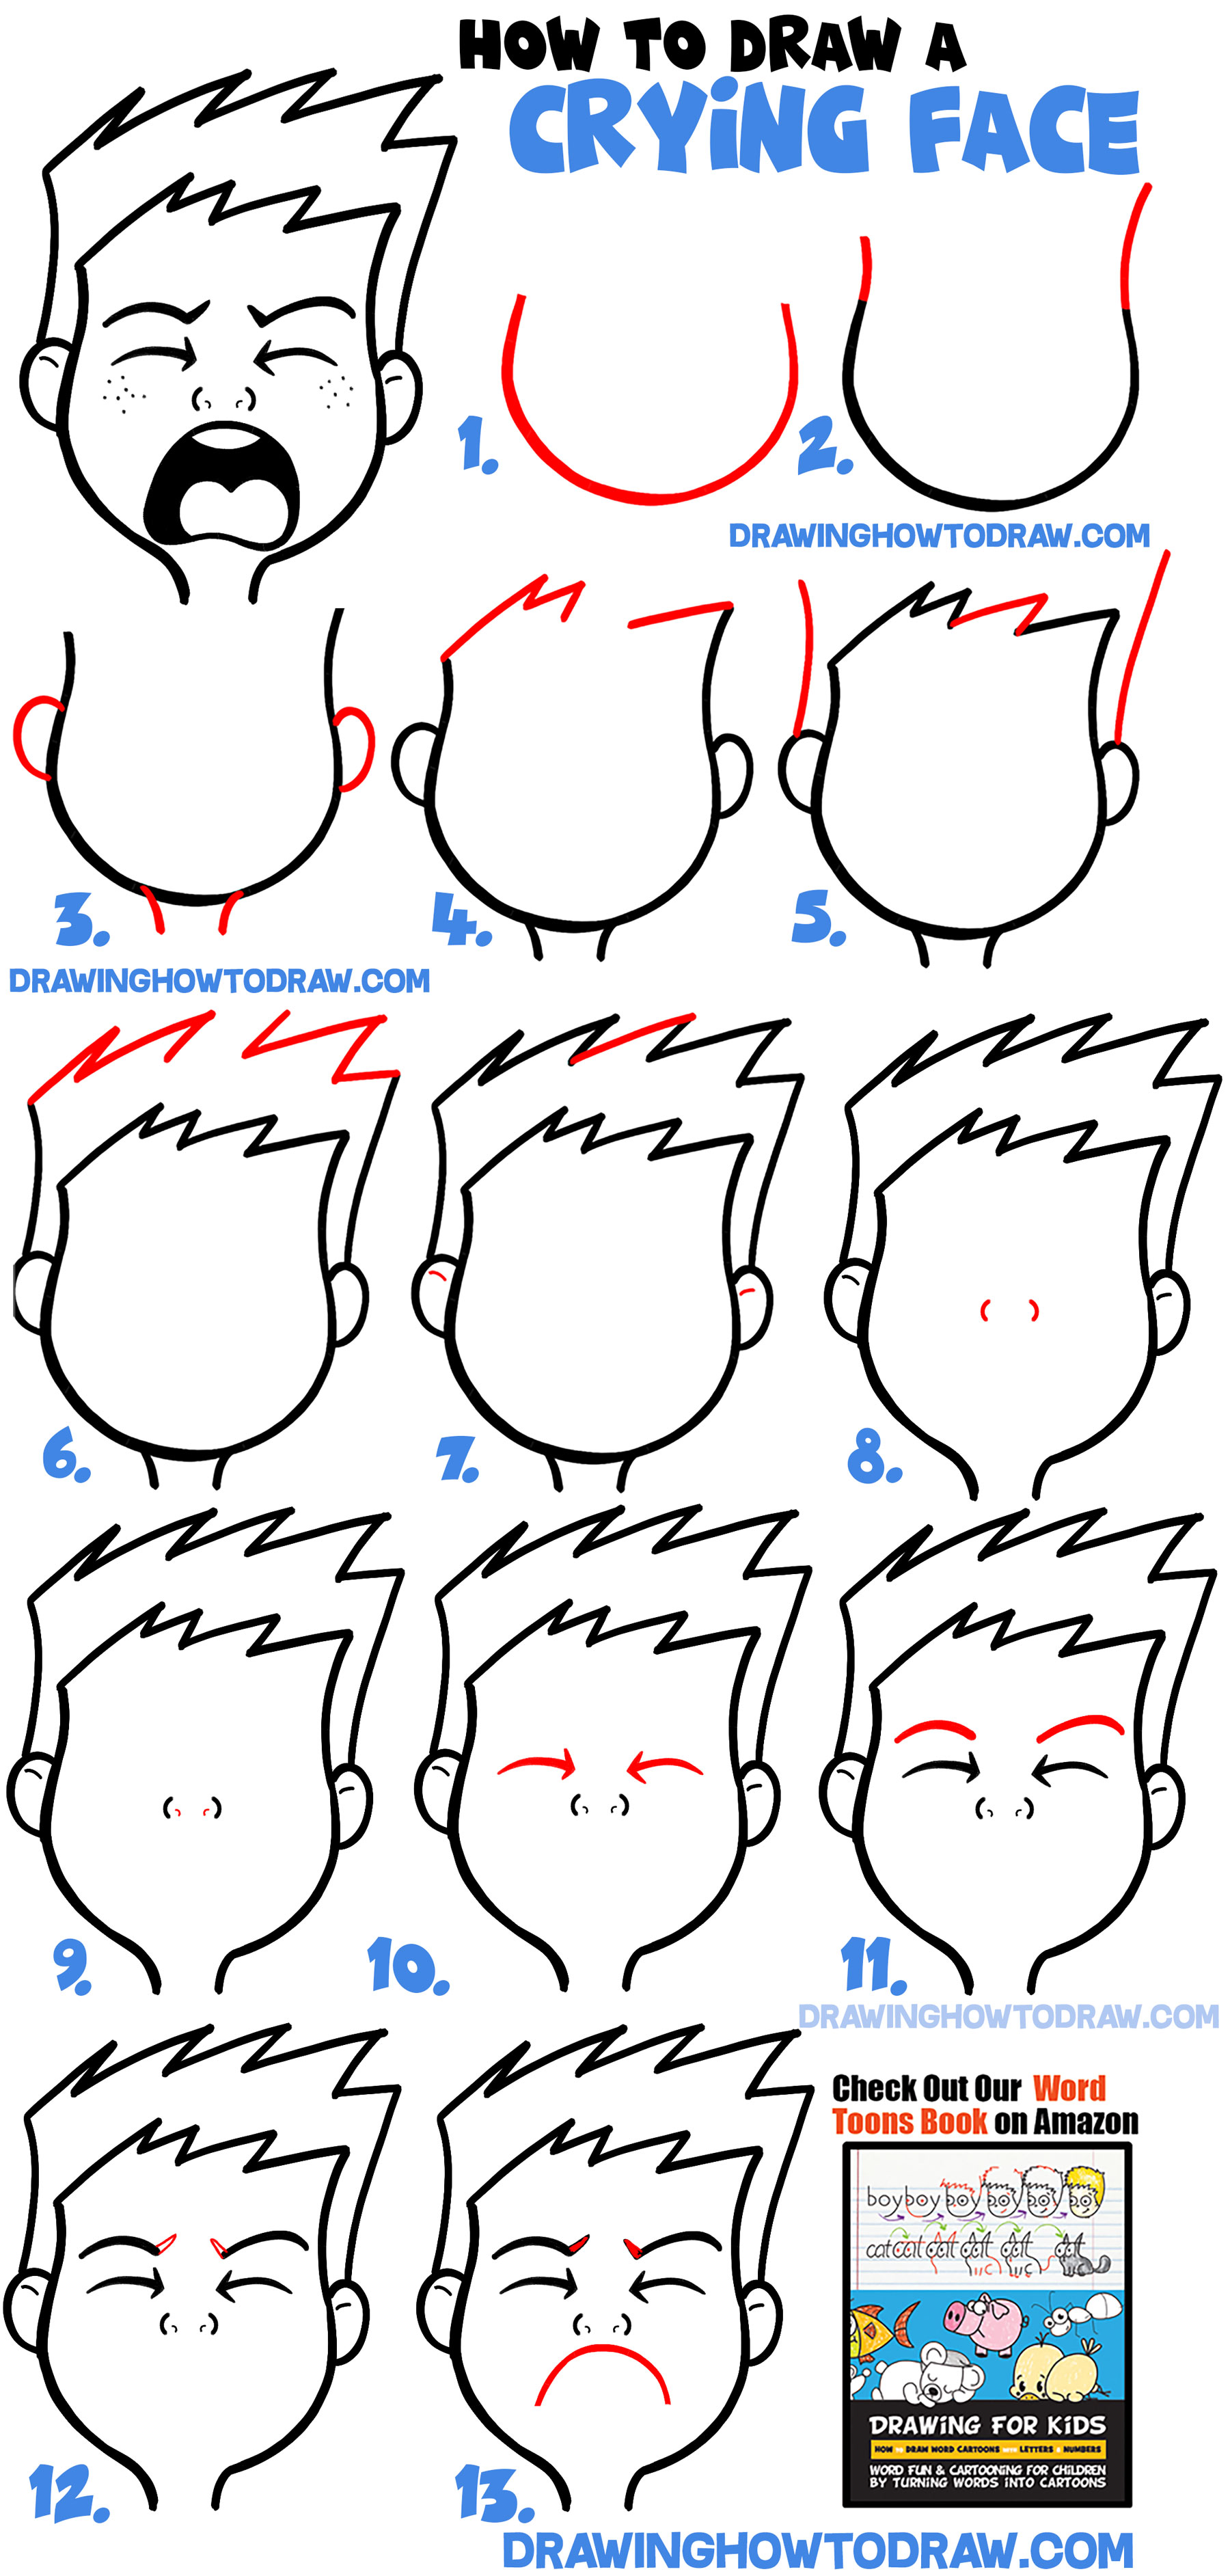 How to Draw an Anime Boy Crying - Easy Step by Step Tutorial